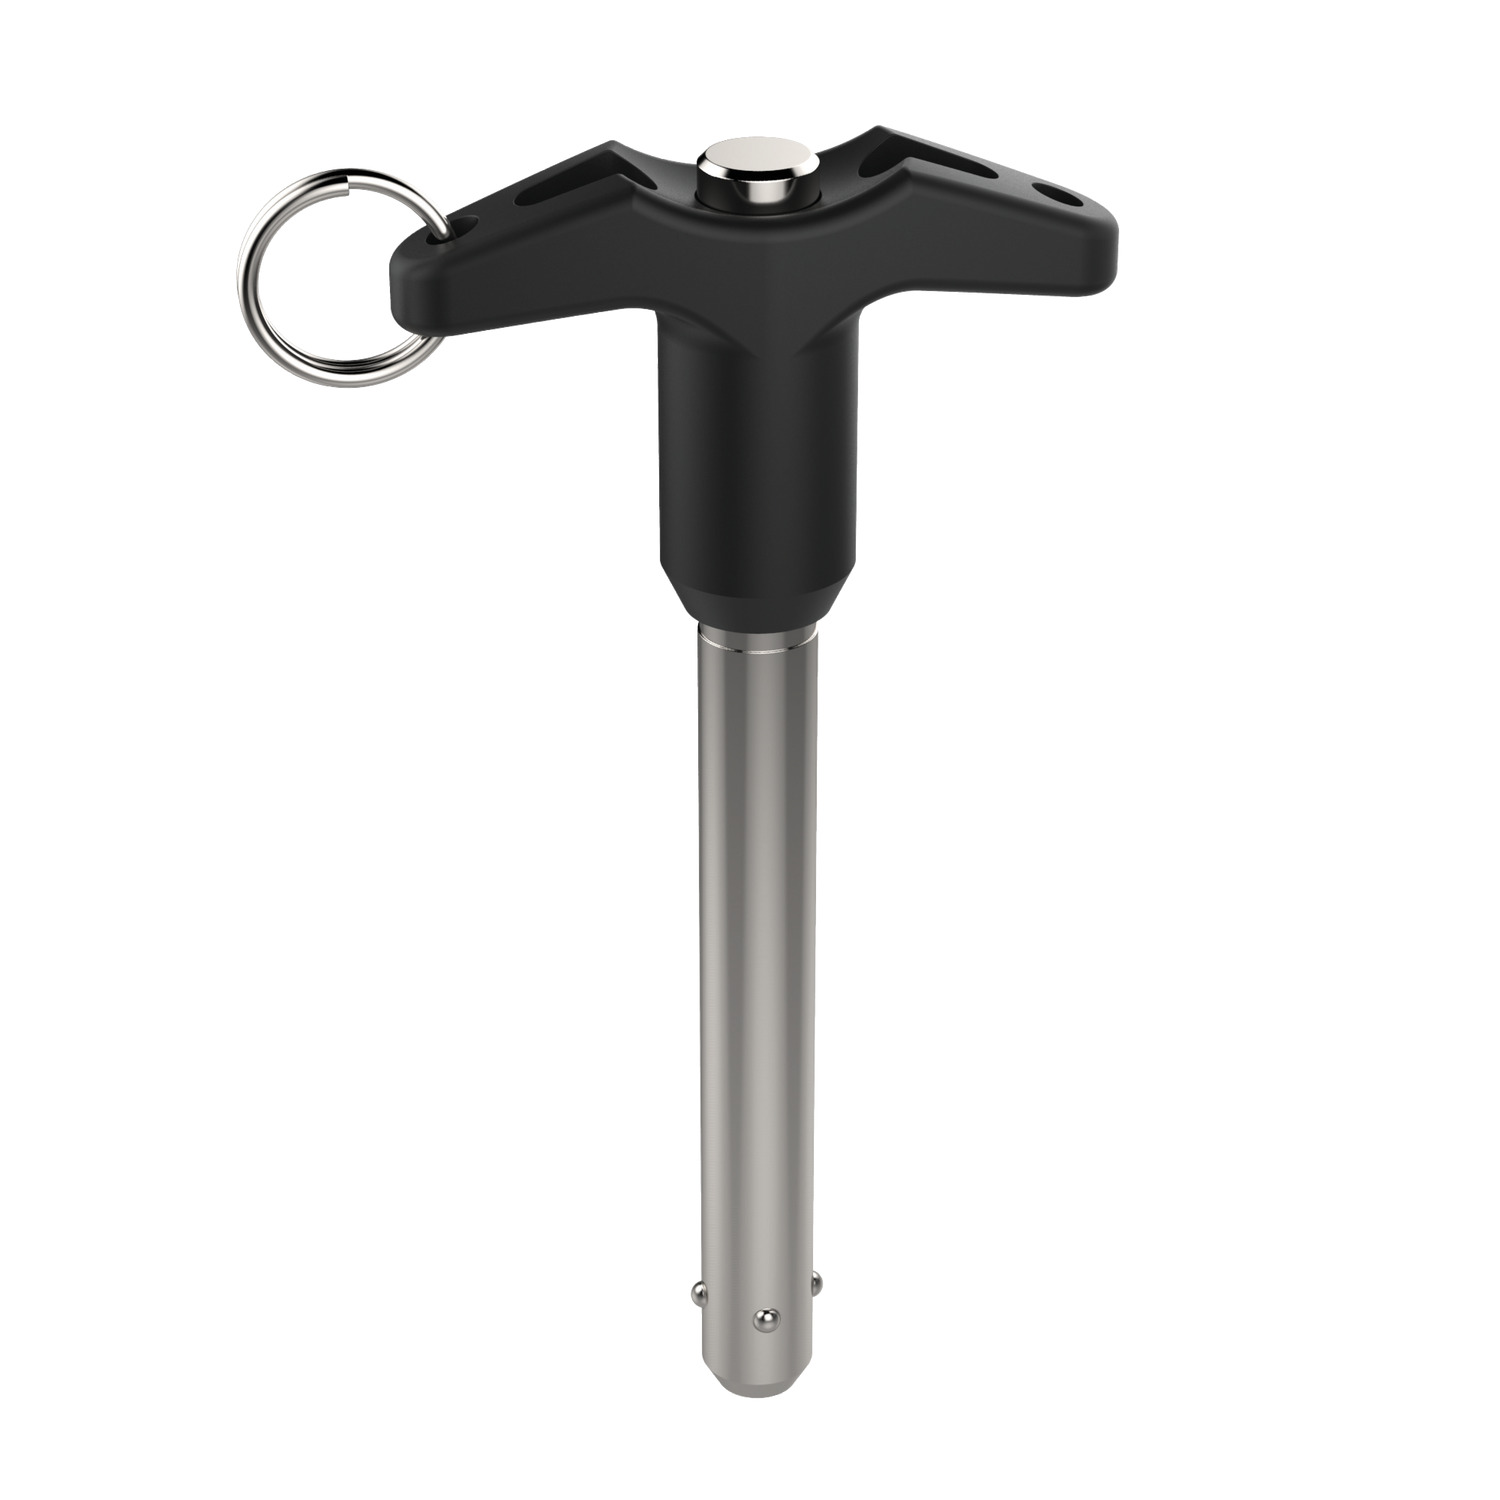 Aviation Pip-Pin - Standard T-Handle Produced to NASM 17985 TA-handled design for excellent handling. For wide range of aviation applications; interior panels, folding tables, ground handling equipment. Available in imperial and metric sizes.